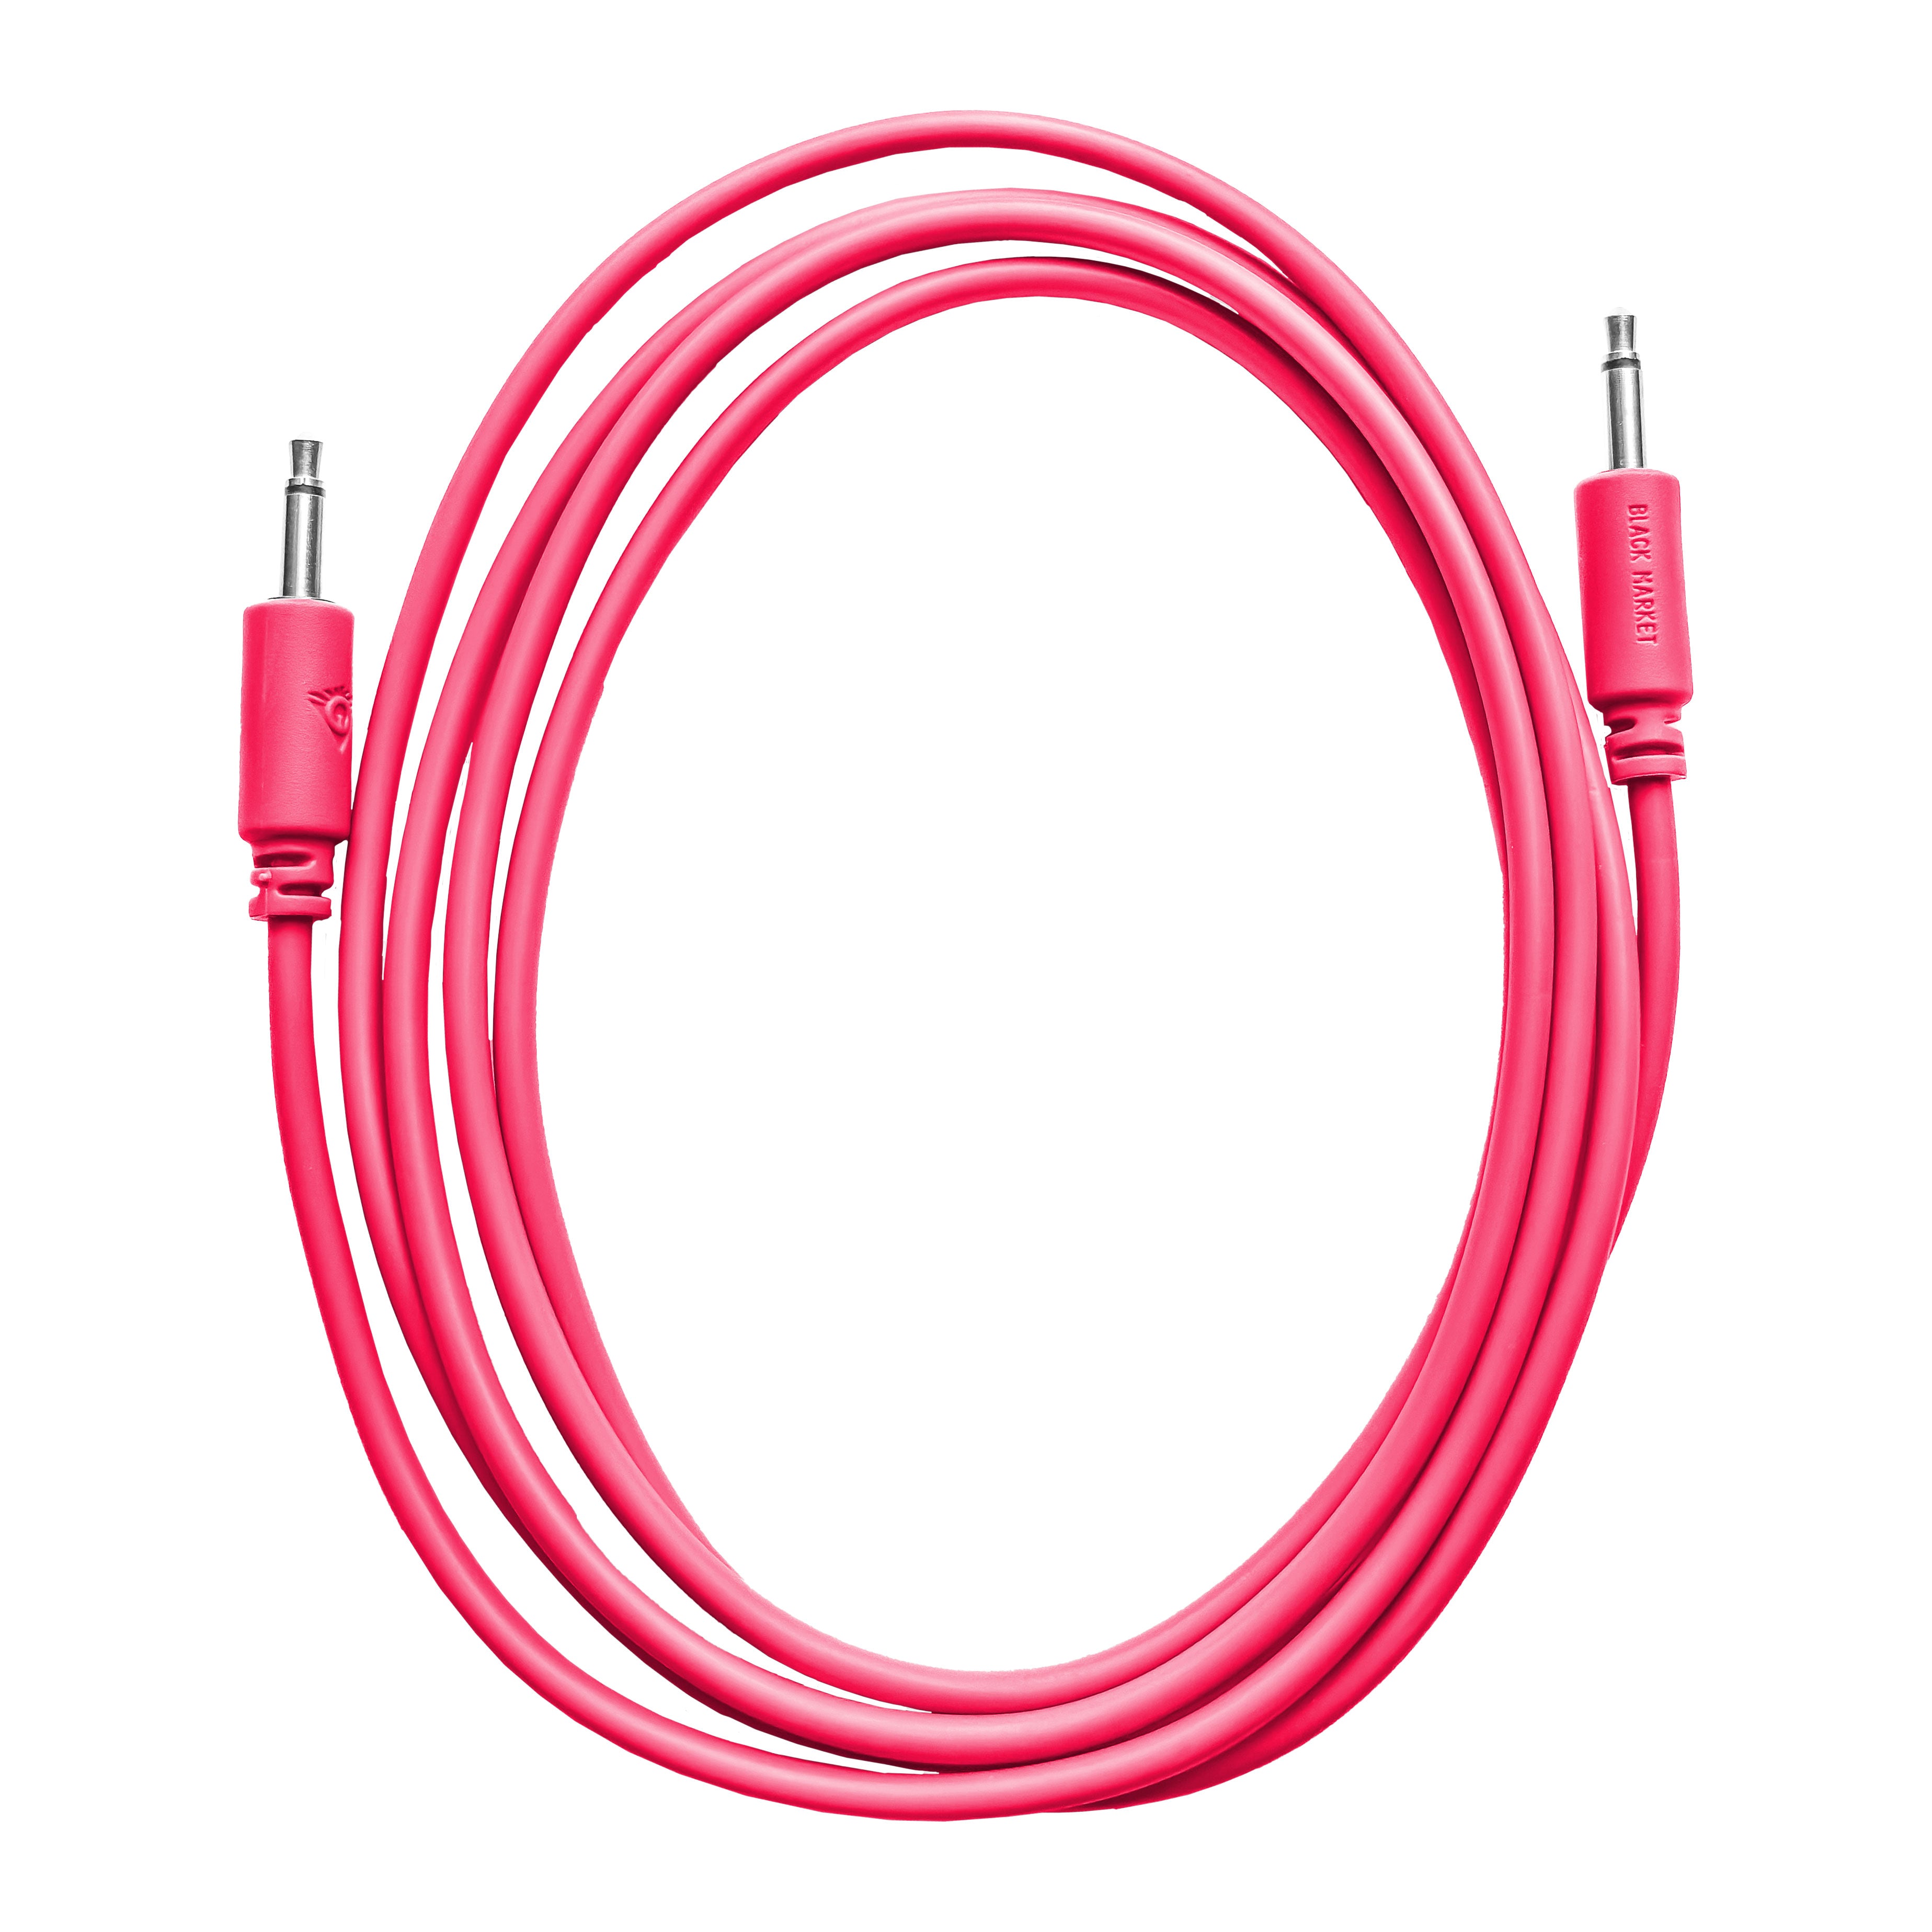 Black Market Modular 3.5mm Patch Cable - 100cm/40" - Pink View 1